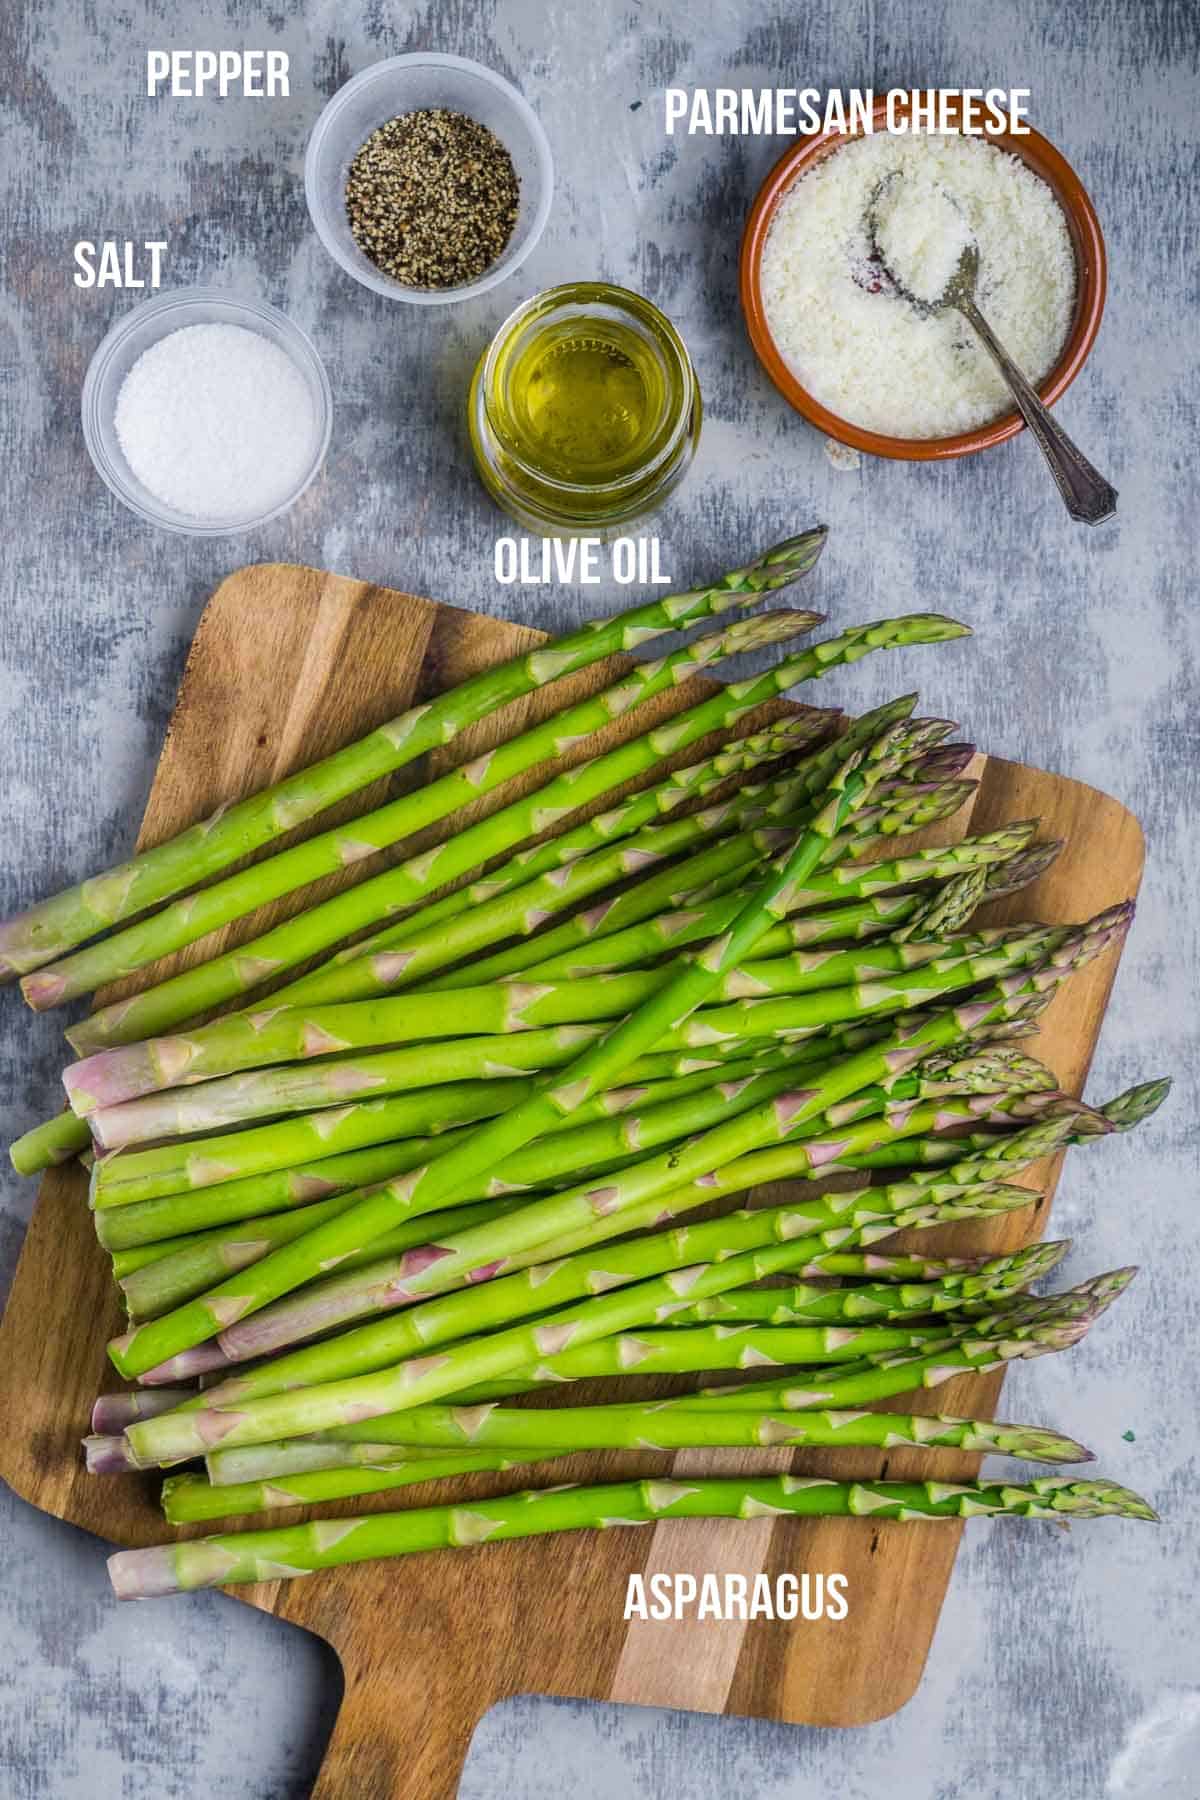 air fryer asparagus ingredients are labeled and ready to prepare.